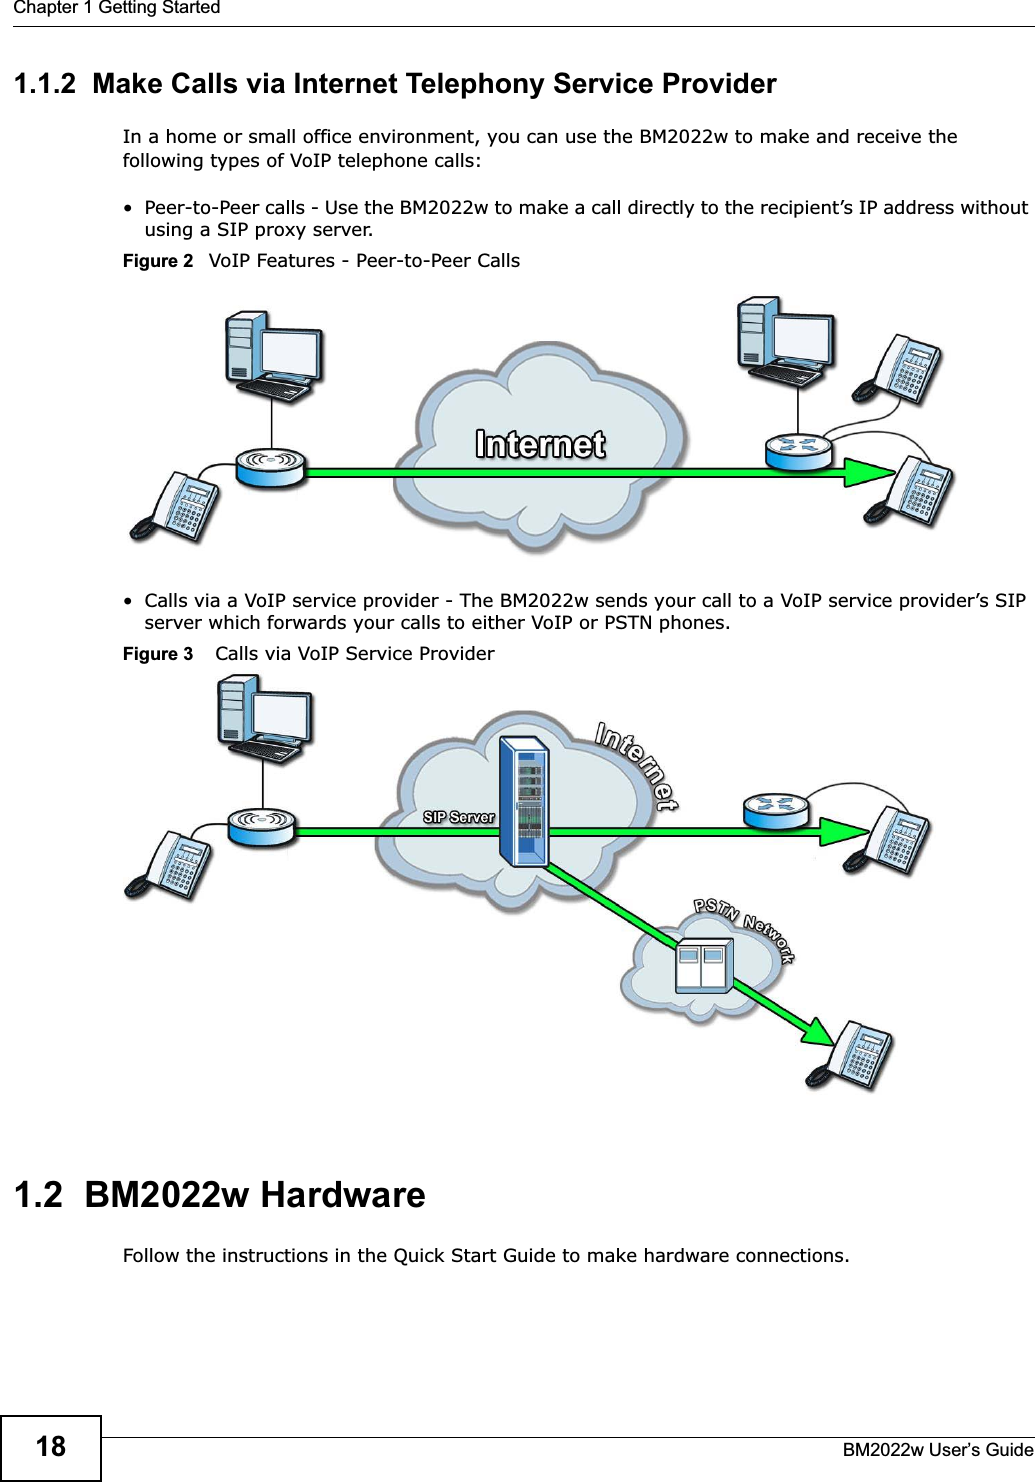 Chapter 1 Getting StartedBM2022w User’s Guide181.1.2  Make Calls via Internet Telephony Service ProviderIn a home or small office environment, you can use the BM2022w to make and receive the following types of VoIP telephone calls:• Peer-to-Peer calls - Use the BM2022w to make a call directly to the recipient’s IP address without using a SIP proxy server.Figure 2   VoIP Features - Peer-to-Peer Calls• Calls via a VoIP service provider - The BM2022w sends your call to a VoIP service provider’s SIP server which forwards your calls to either VoIP or PSTN phones.Figure 3    Calls via VoIP Service Provider1.2  BM2022w HardwareFollow the instructions in the Quick Start Guide to make hardware connections.